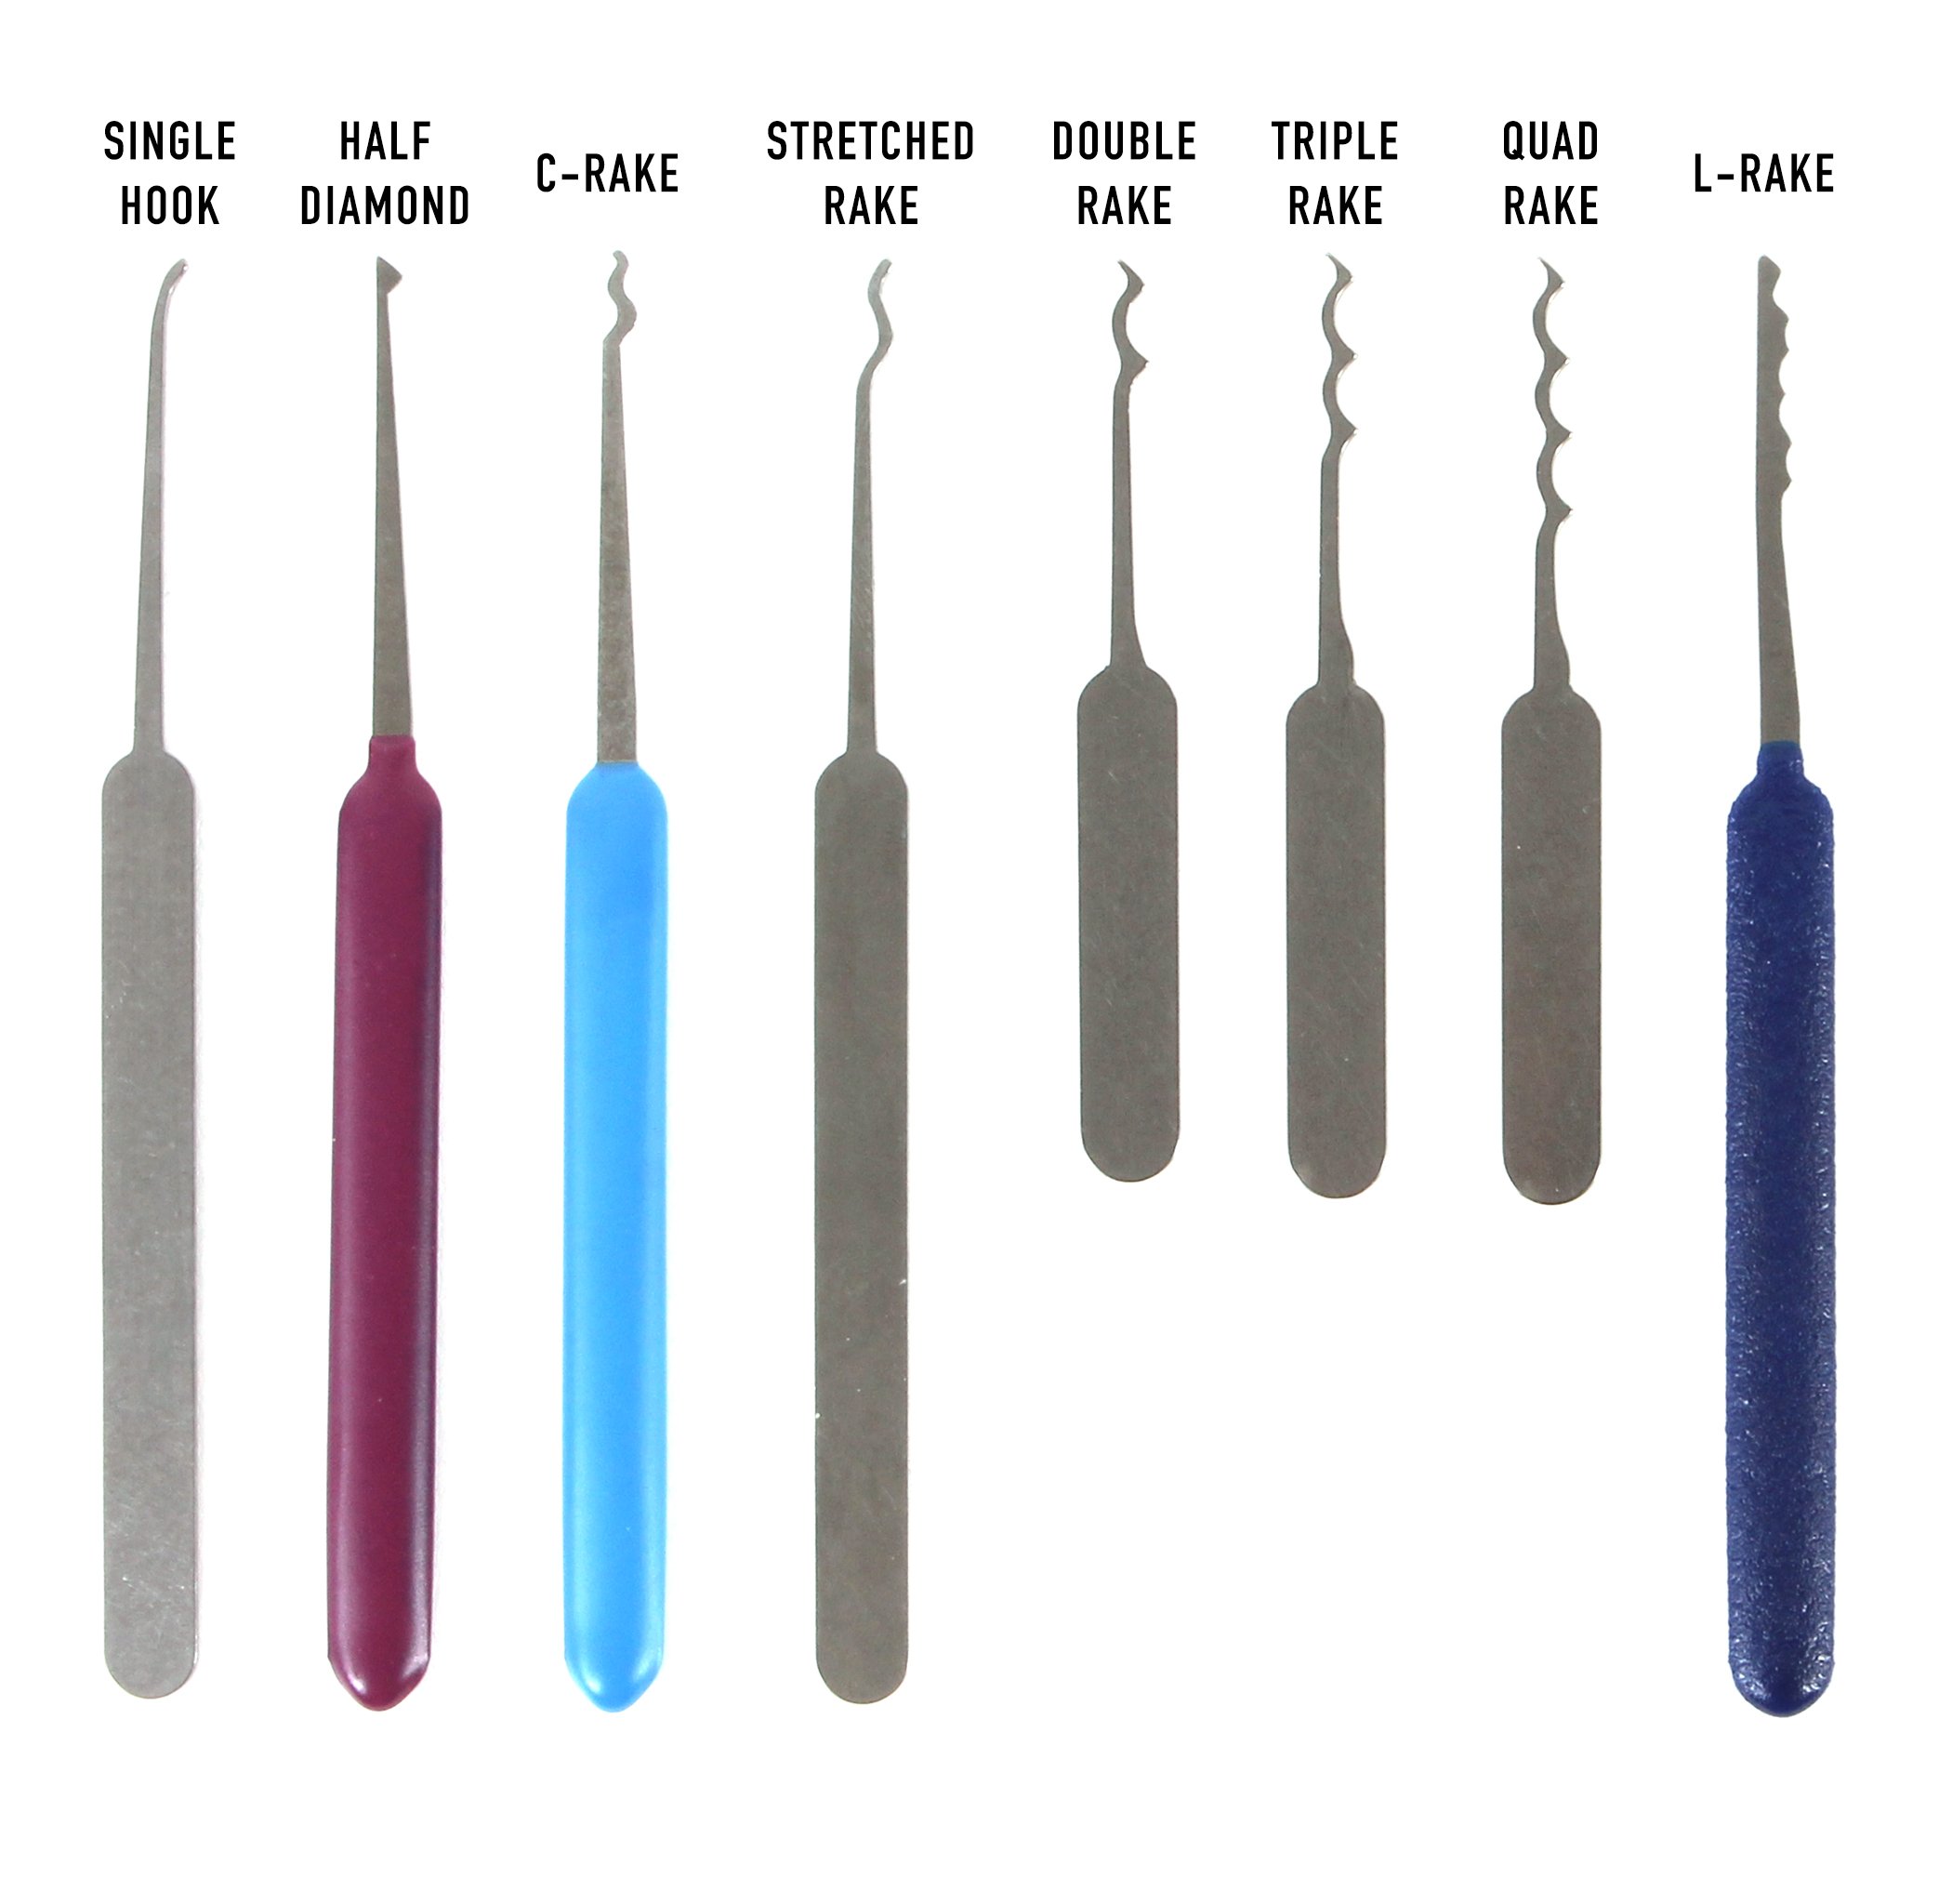 What are the different types of lock picks?